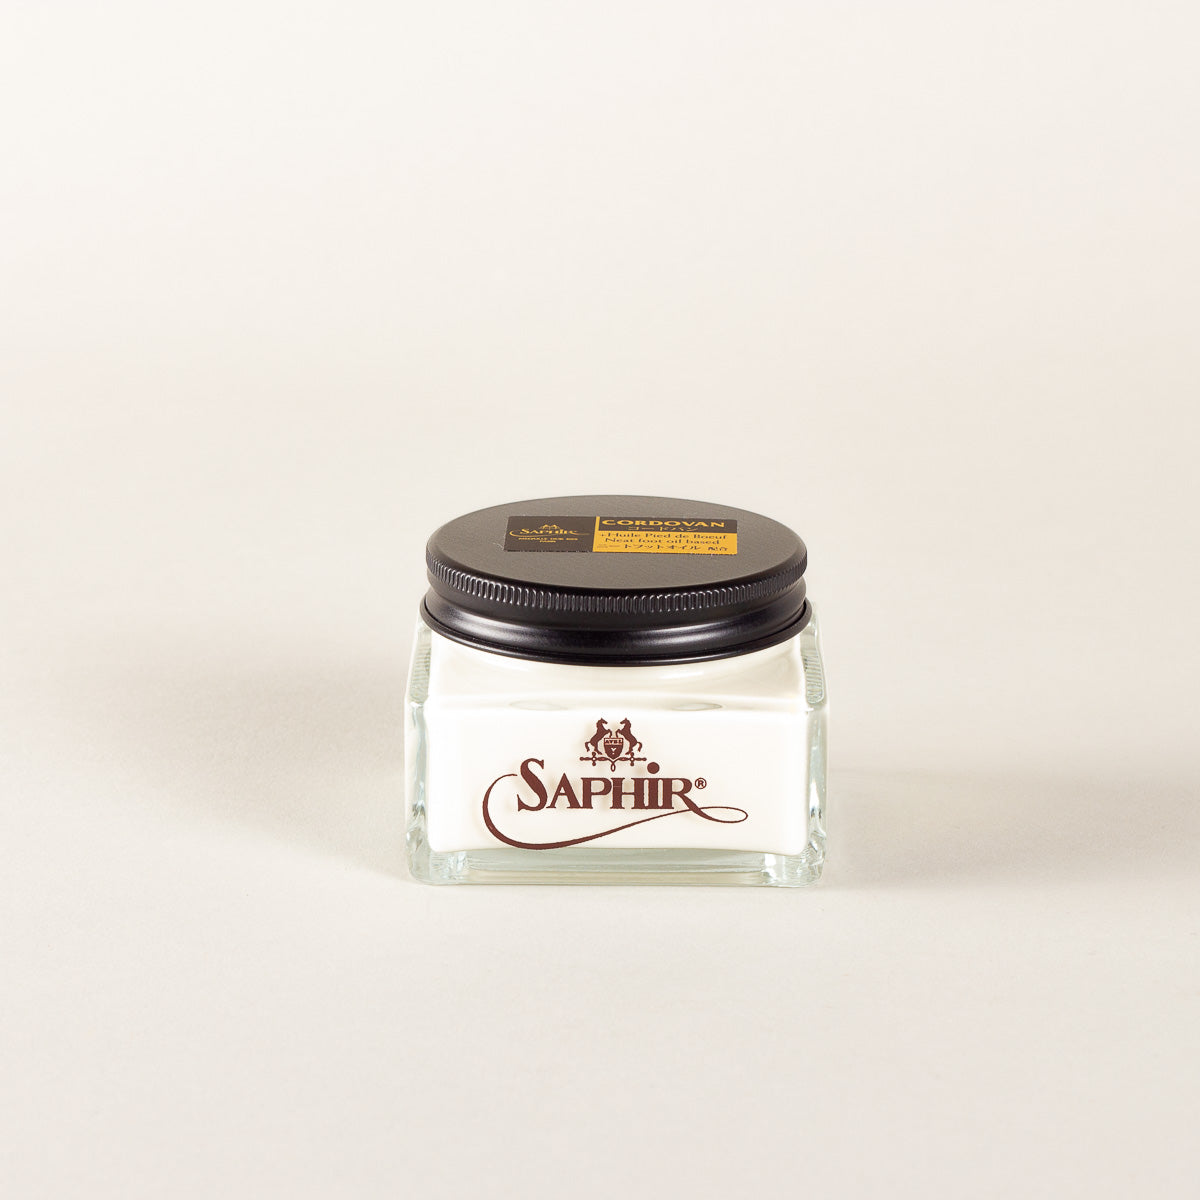 Saphir Juvacuir Recoloring Cream for Leather Goods